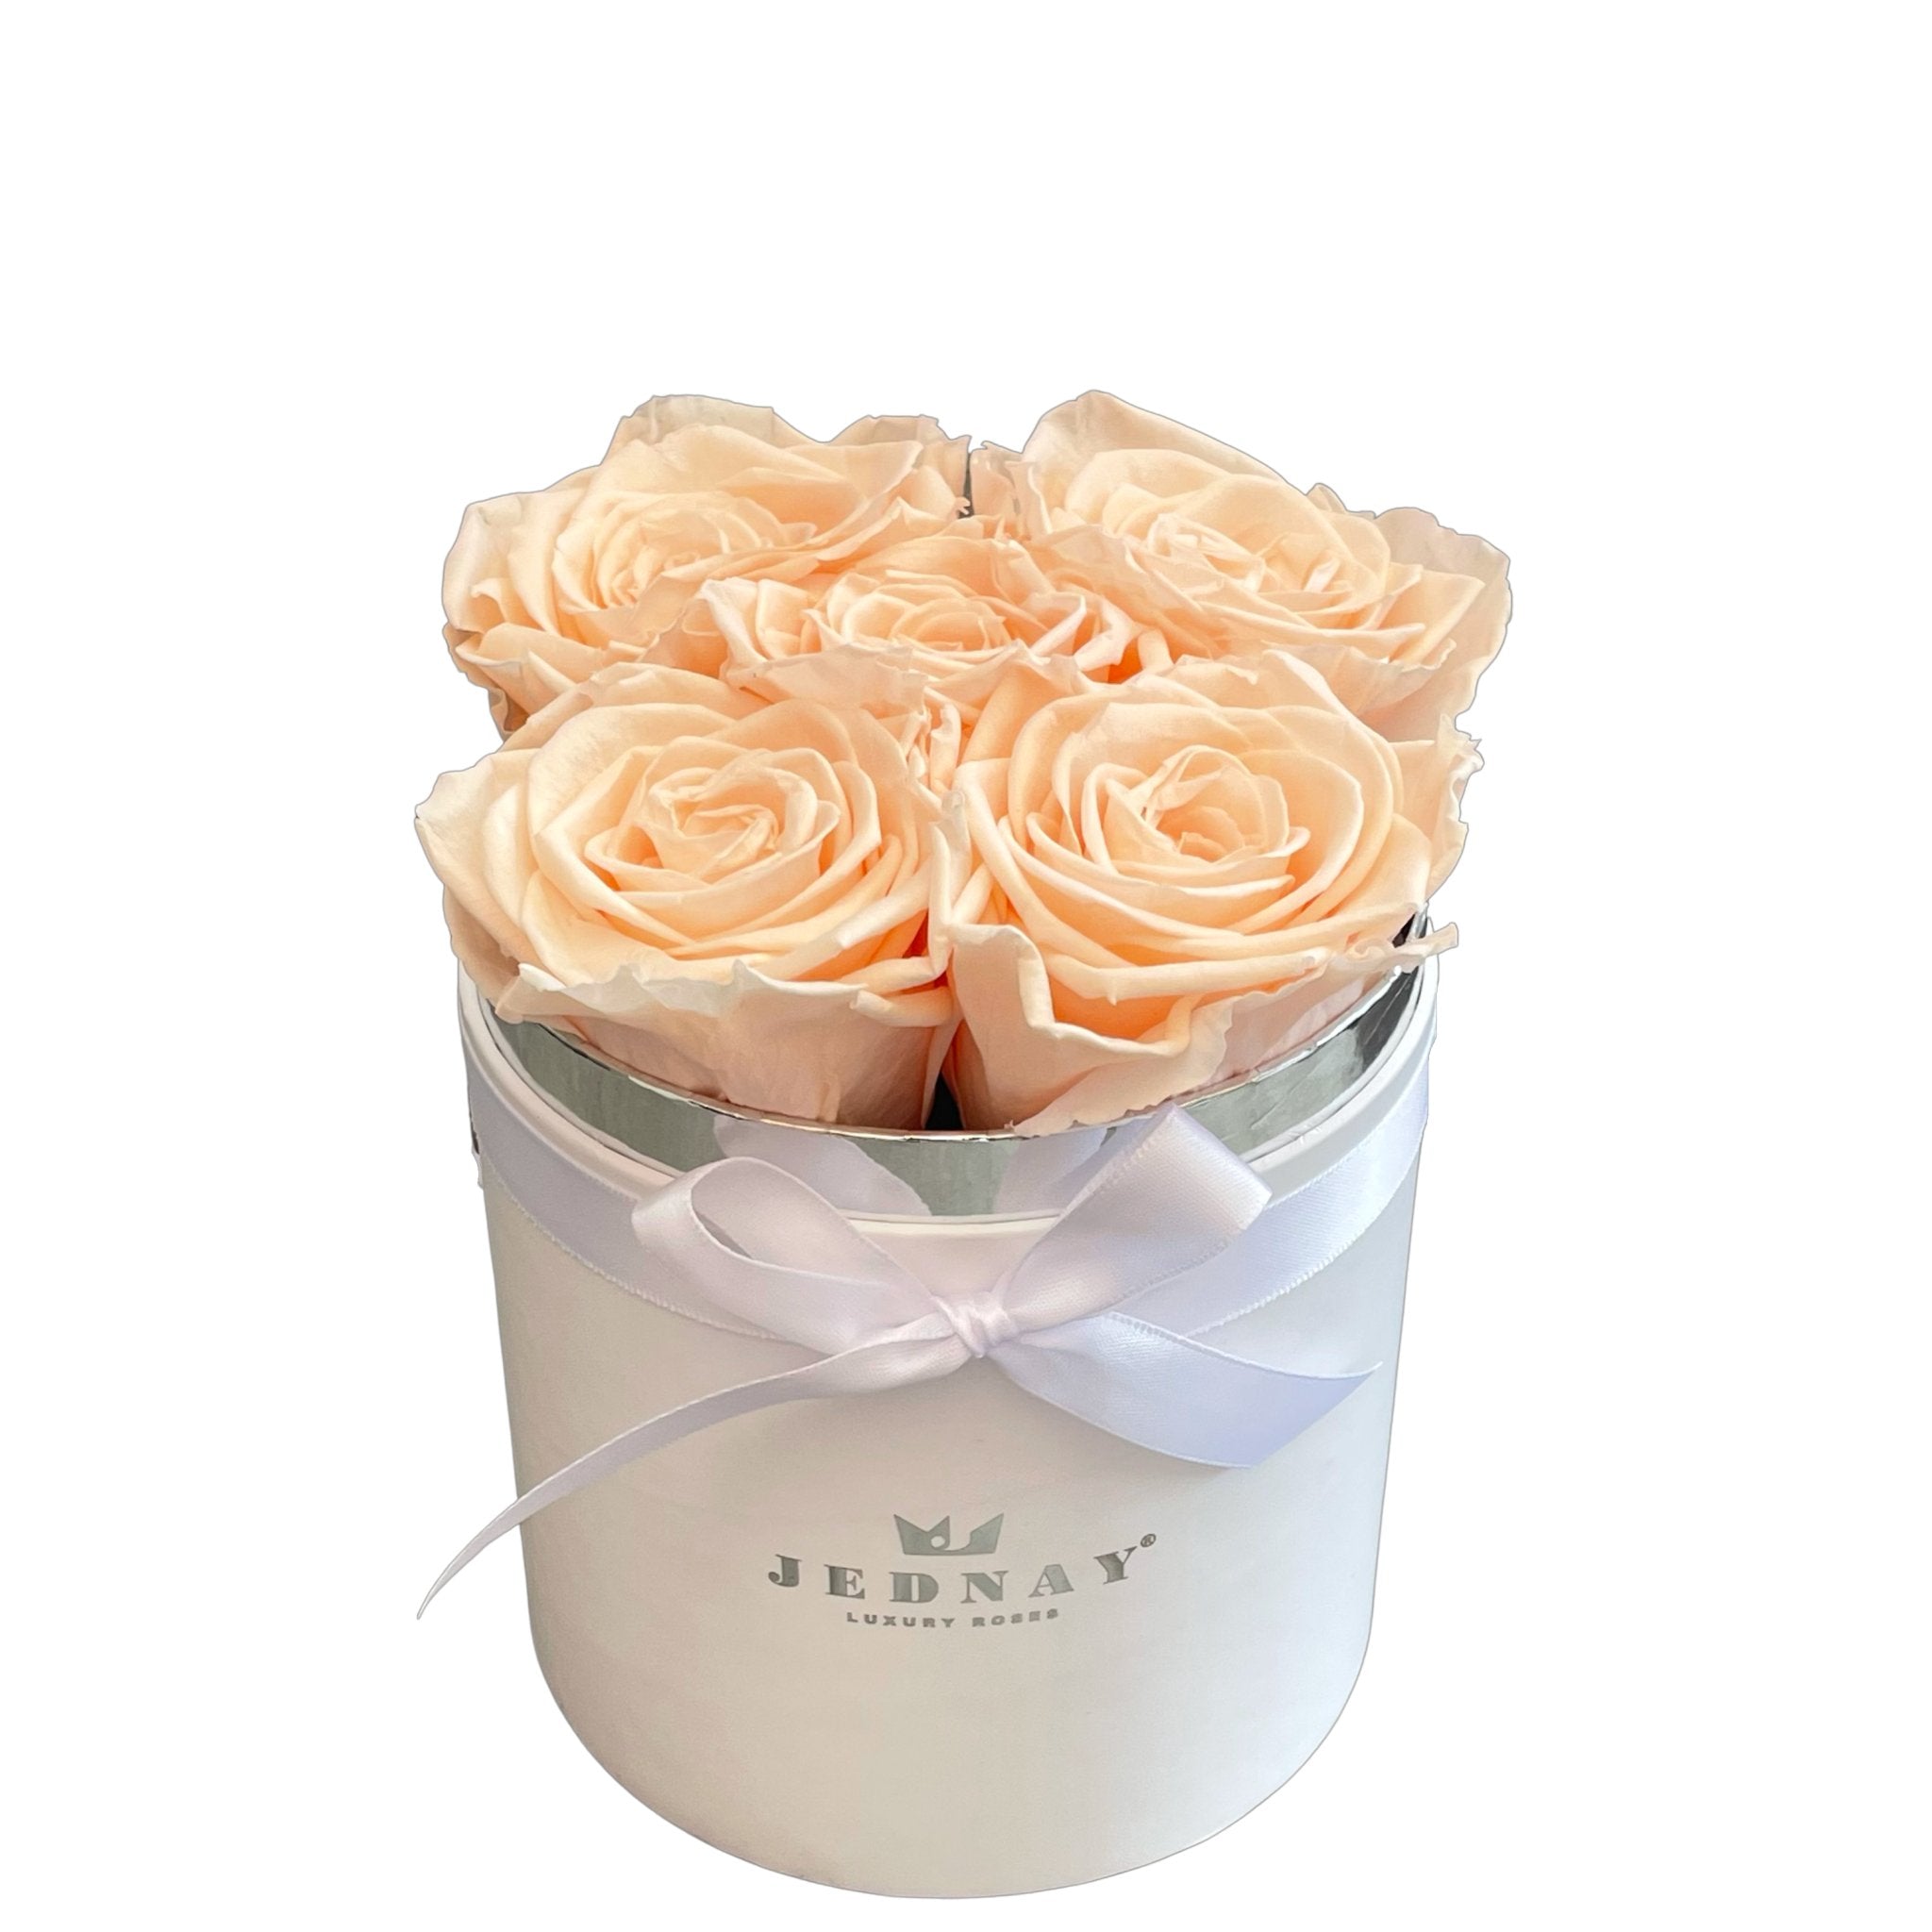 What Mums Really Want For Mother’s Day - Jednay Roses